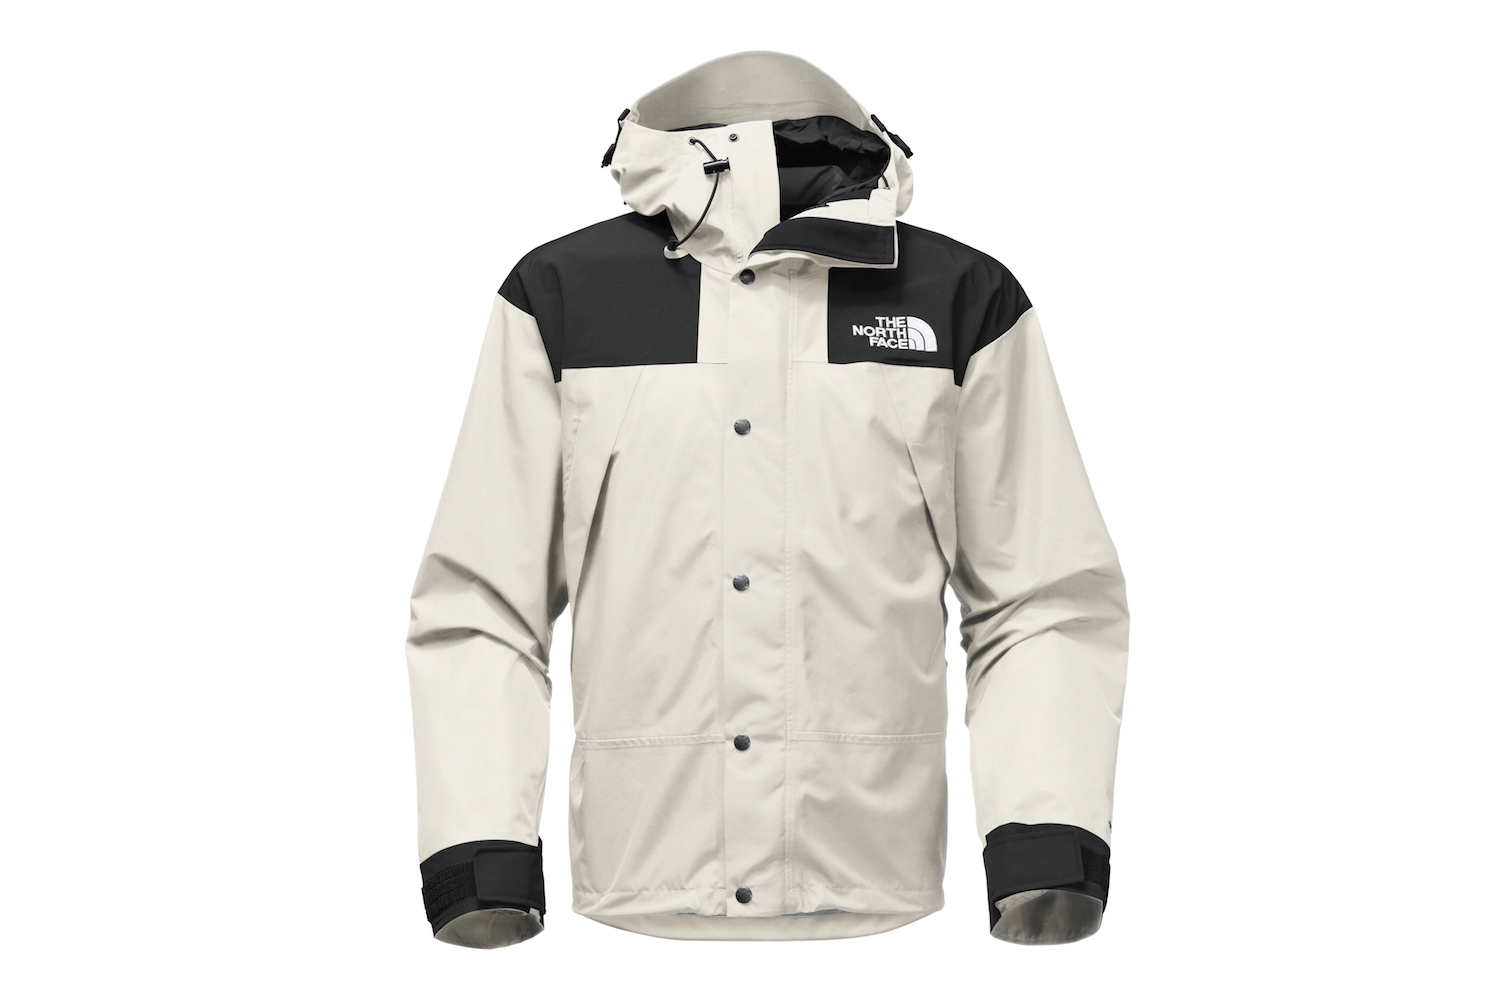 The North Face Retros Its Iconic  Mountain Jacket